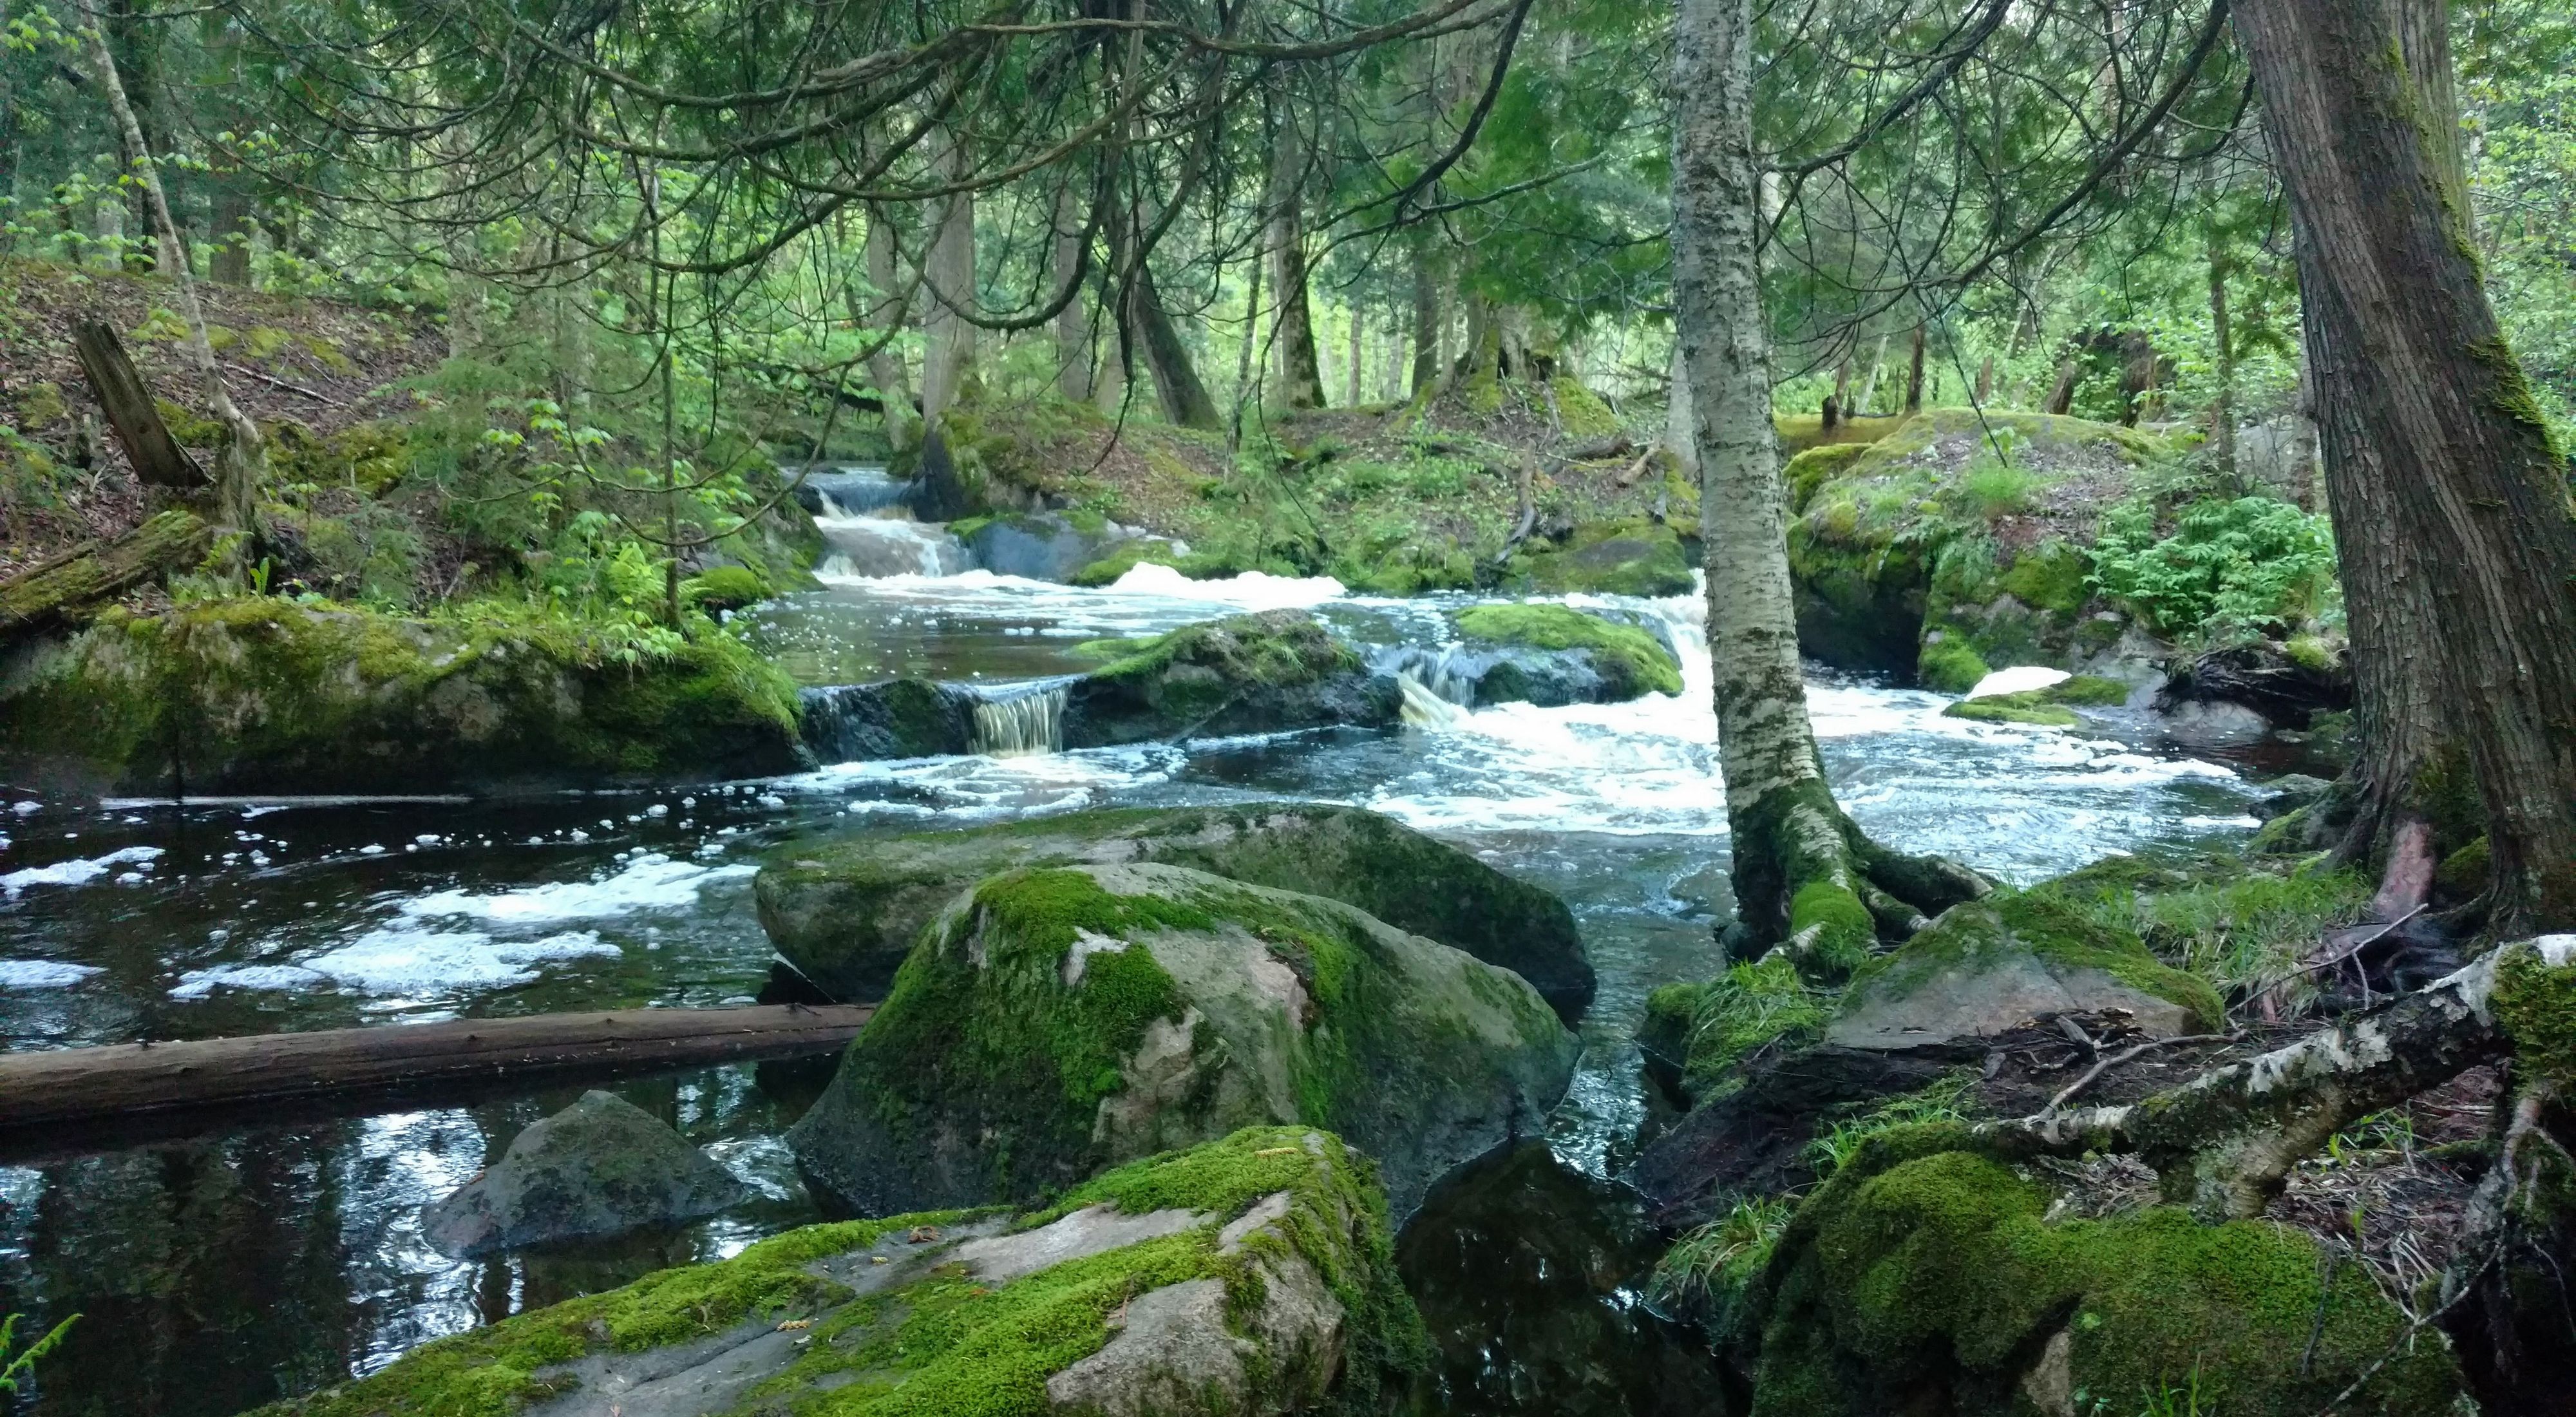 Water in a small stream flows over a series of rock ledges among boulders covered with moss and surrounded by a conifer forest.